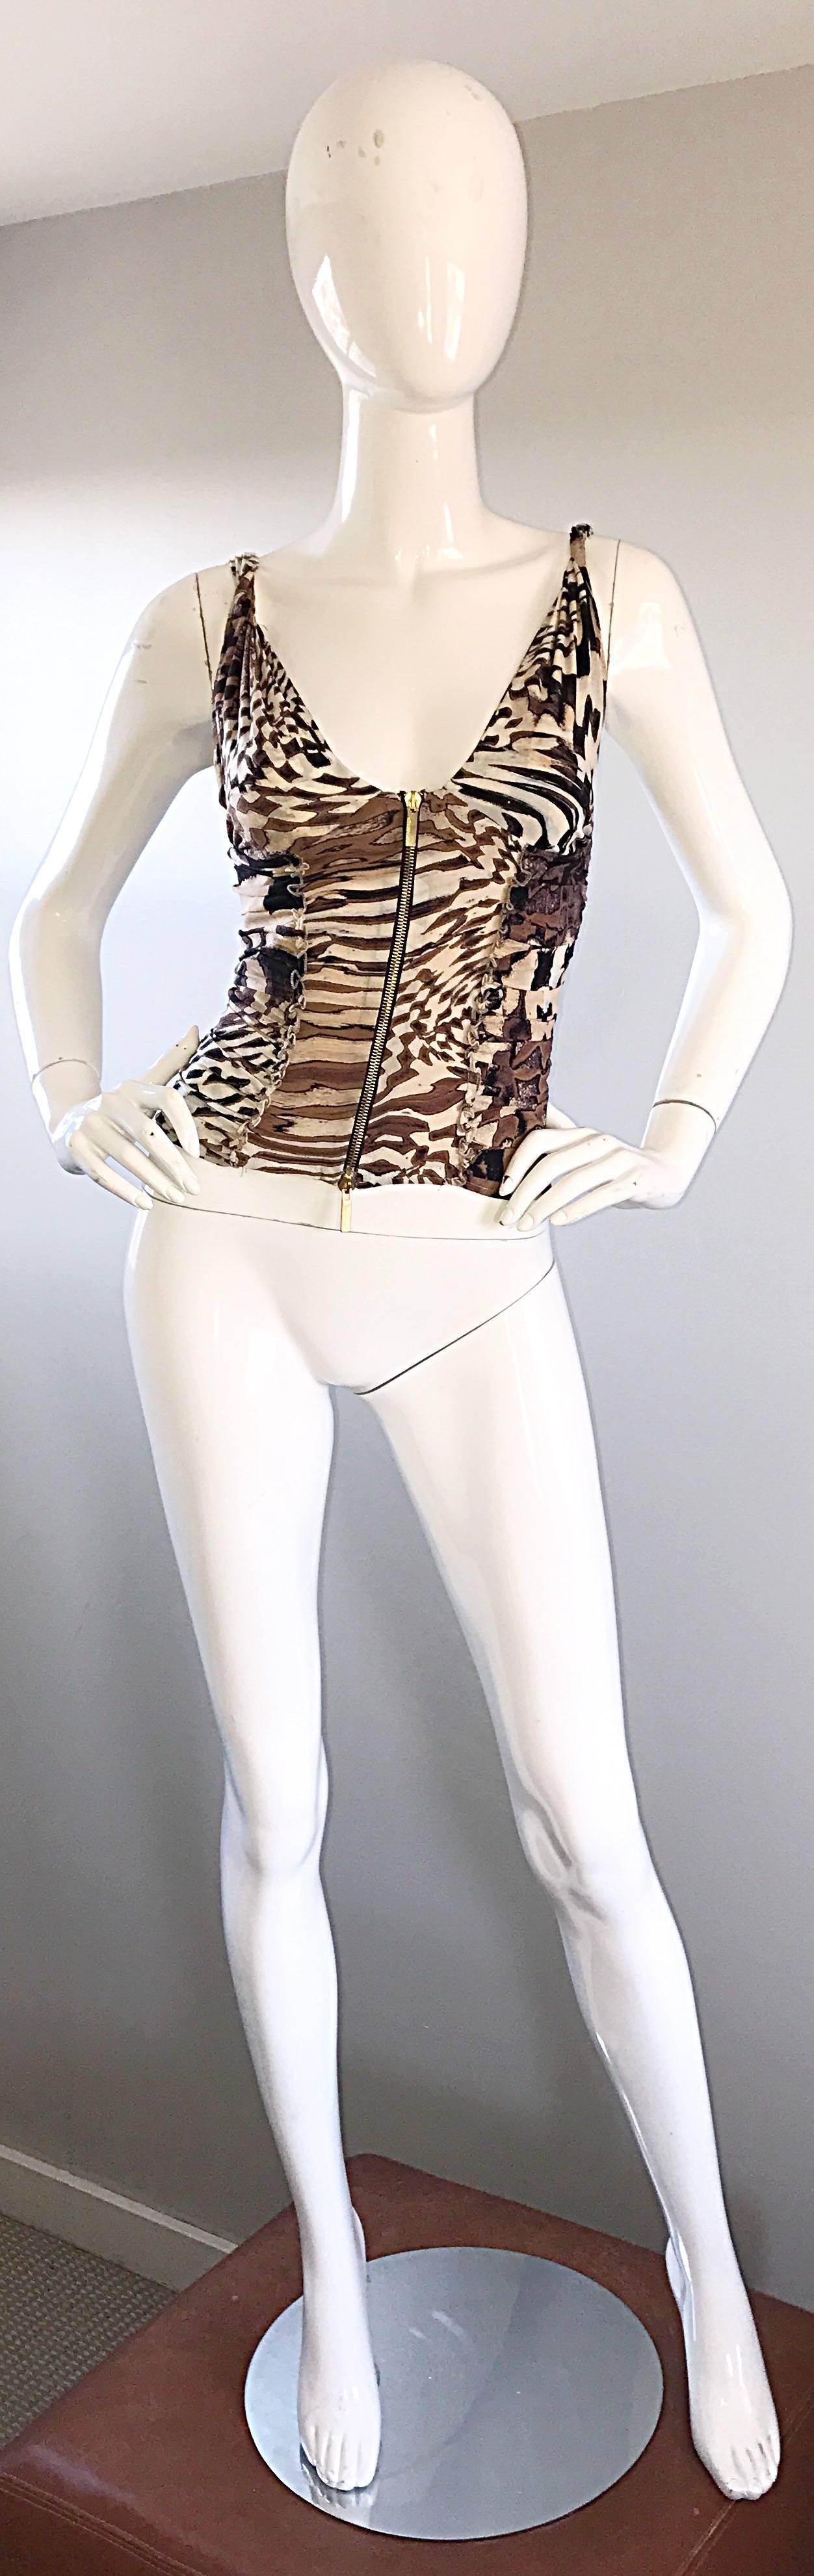 Sexy 1990s ROBERTO CAVALLI animal print silk bustier top! Features a full metal brass zipper up the front, so can be worn all the way up, or left partially open. Ruffle details on the front and back body. Asymmetrical animal zebra prints in brown,